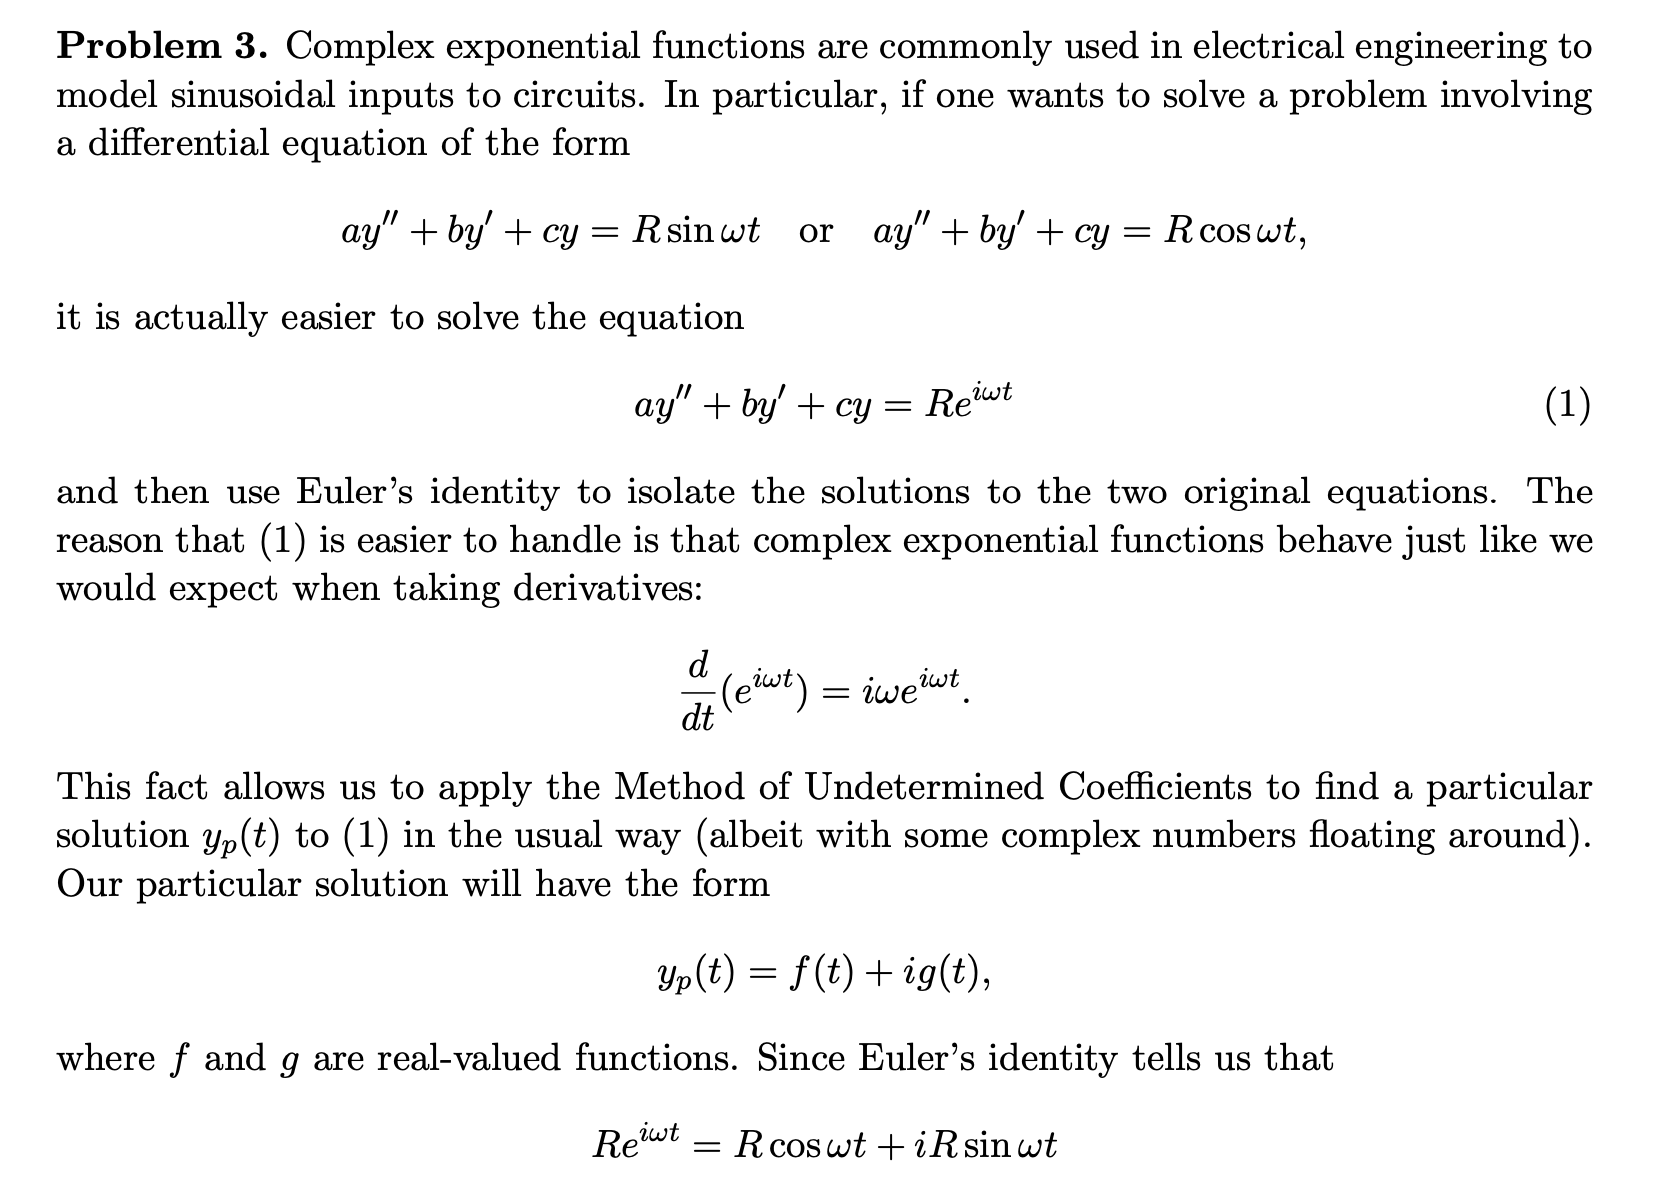 Problem 3. Complex exponential functions are commonly used in electrical engineering to
model sinusoidal inputs to circuits. In particular, if one wants to solve a problem involving
a differential equation of the form
ay" + by' + cy = Rsin wt
or ay" + by' + cy
Rcos wt,
it is actually easier to solve the equation
ay" + by' + cy = Rewt
(1)
and then use Euler's identity to isolate the solutions to the two original equations. The
reason that (1) is easier to handle is that complex exponential functions behave just like we
would expect when taking derivatives:
d
(eiwt) = iweiwt
dt
This fact allows us to apply the Method of Undetermined Coefficients to find a particular
solution yp(t) to (1) in the usual way (albeit with some complex numbers floating around).
Our particular solution will have the form
Yp(t) = f(t) + ig(t),
where f and g are real-valued functions. Since Euler's identity tells us that
Reut
iwt
= R cos wt +iRsin wt
